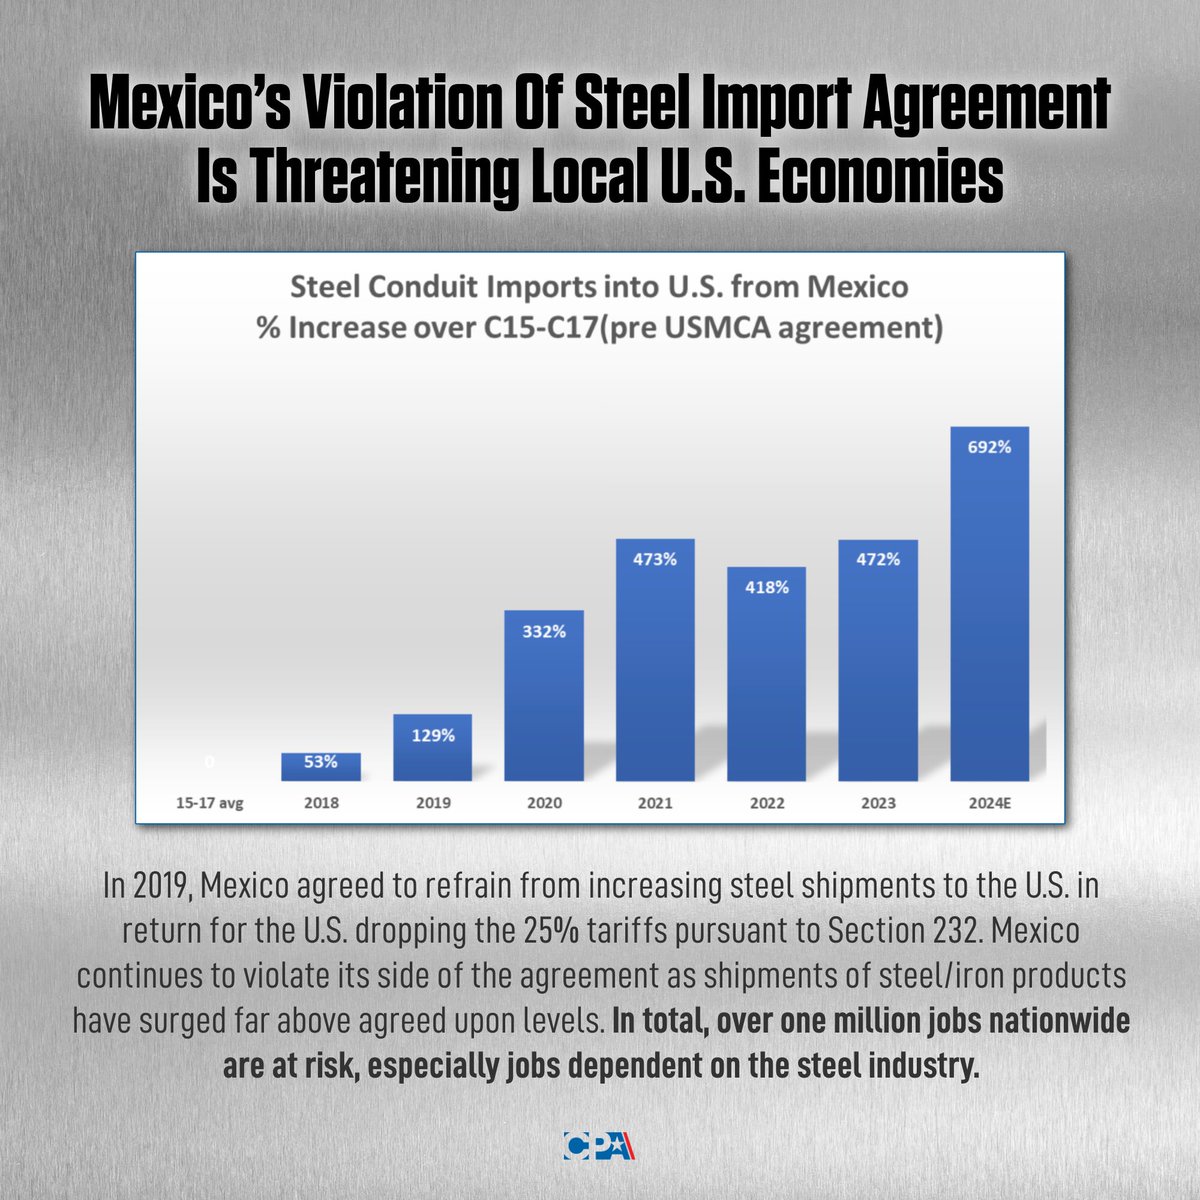 NEW analysis from the CPA Economics Team: Steel imports from Mexico have surged far above historic levels, violating Mexico's trade agreement with the U.S. and threatening local U.S. economies. ➔ tinyurl.com/44epzzce